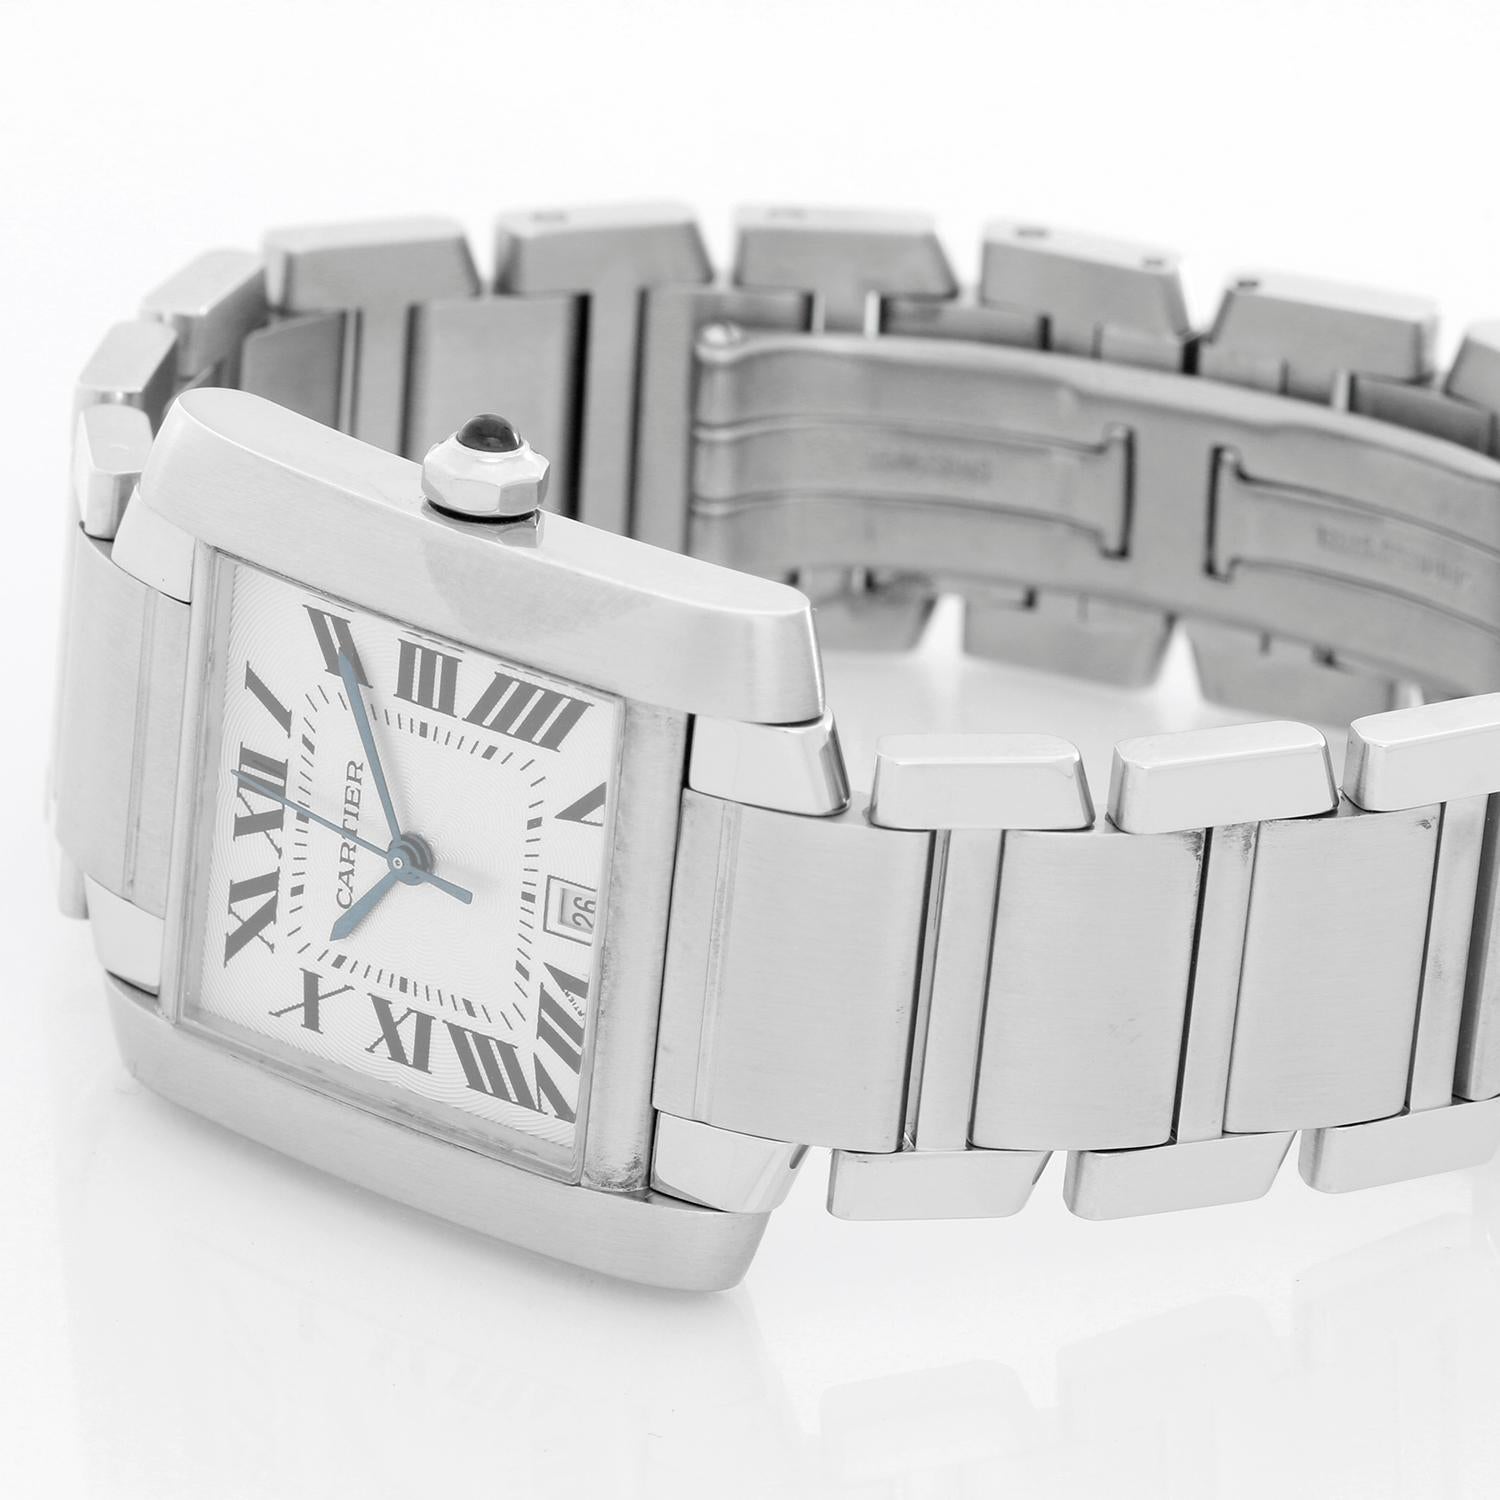 Cartier Tank Francaise Automatic Men's Stainless Steel Watch W51002Q3 - Automatic winding. Stainless steel case (28mm x 32mm). Silver guilloche dial with black Roman numerals; date at 6 o'clock. Stainless steel Cartier bracelet. Pre-owned with